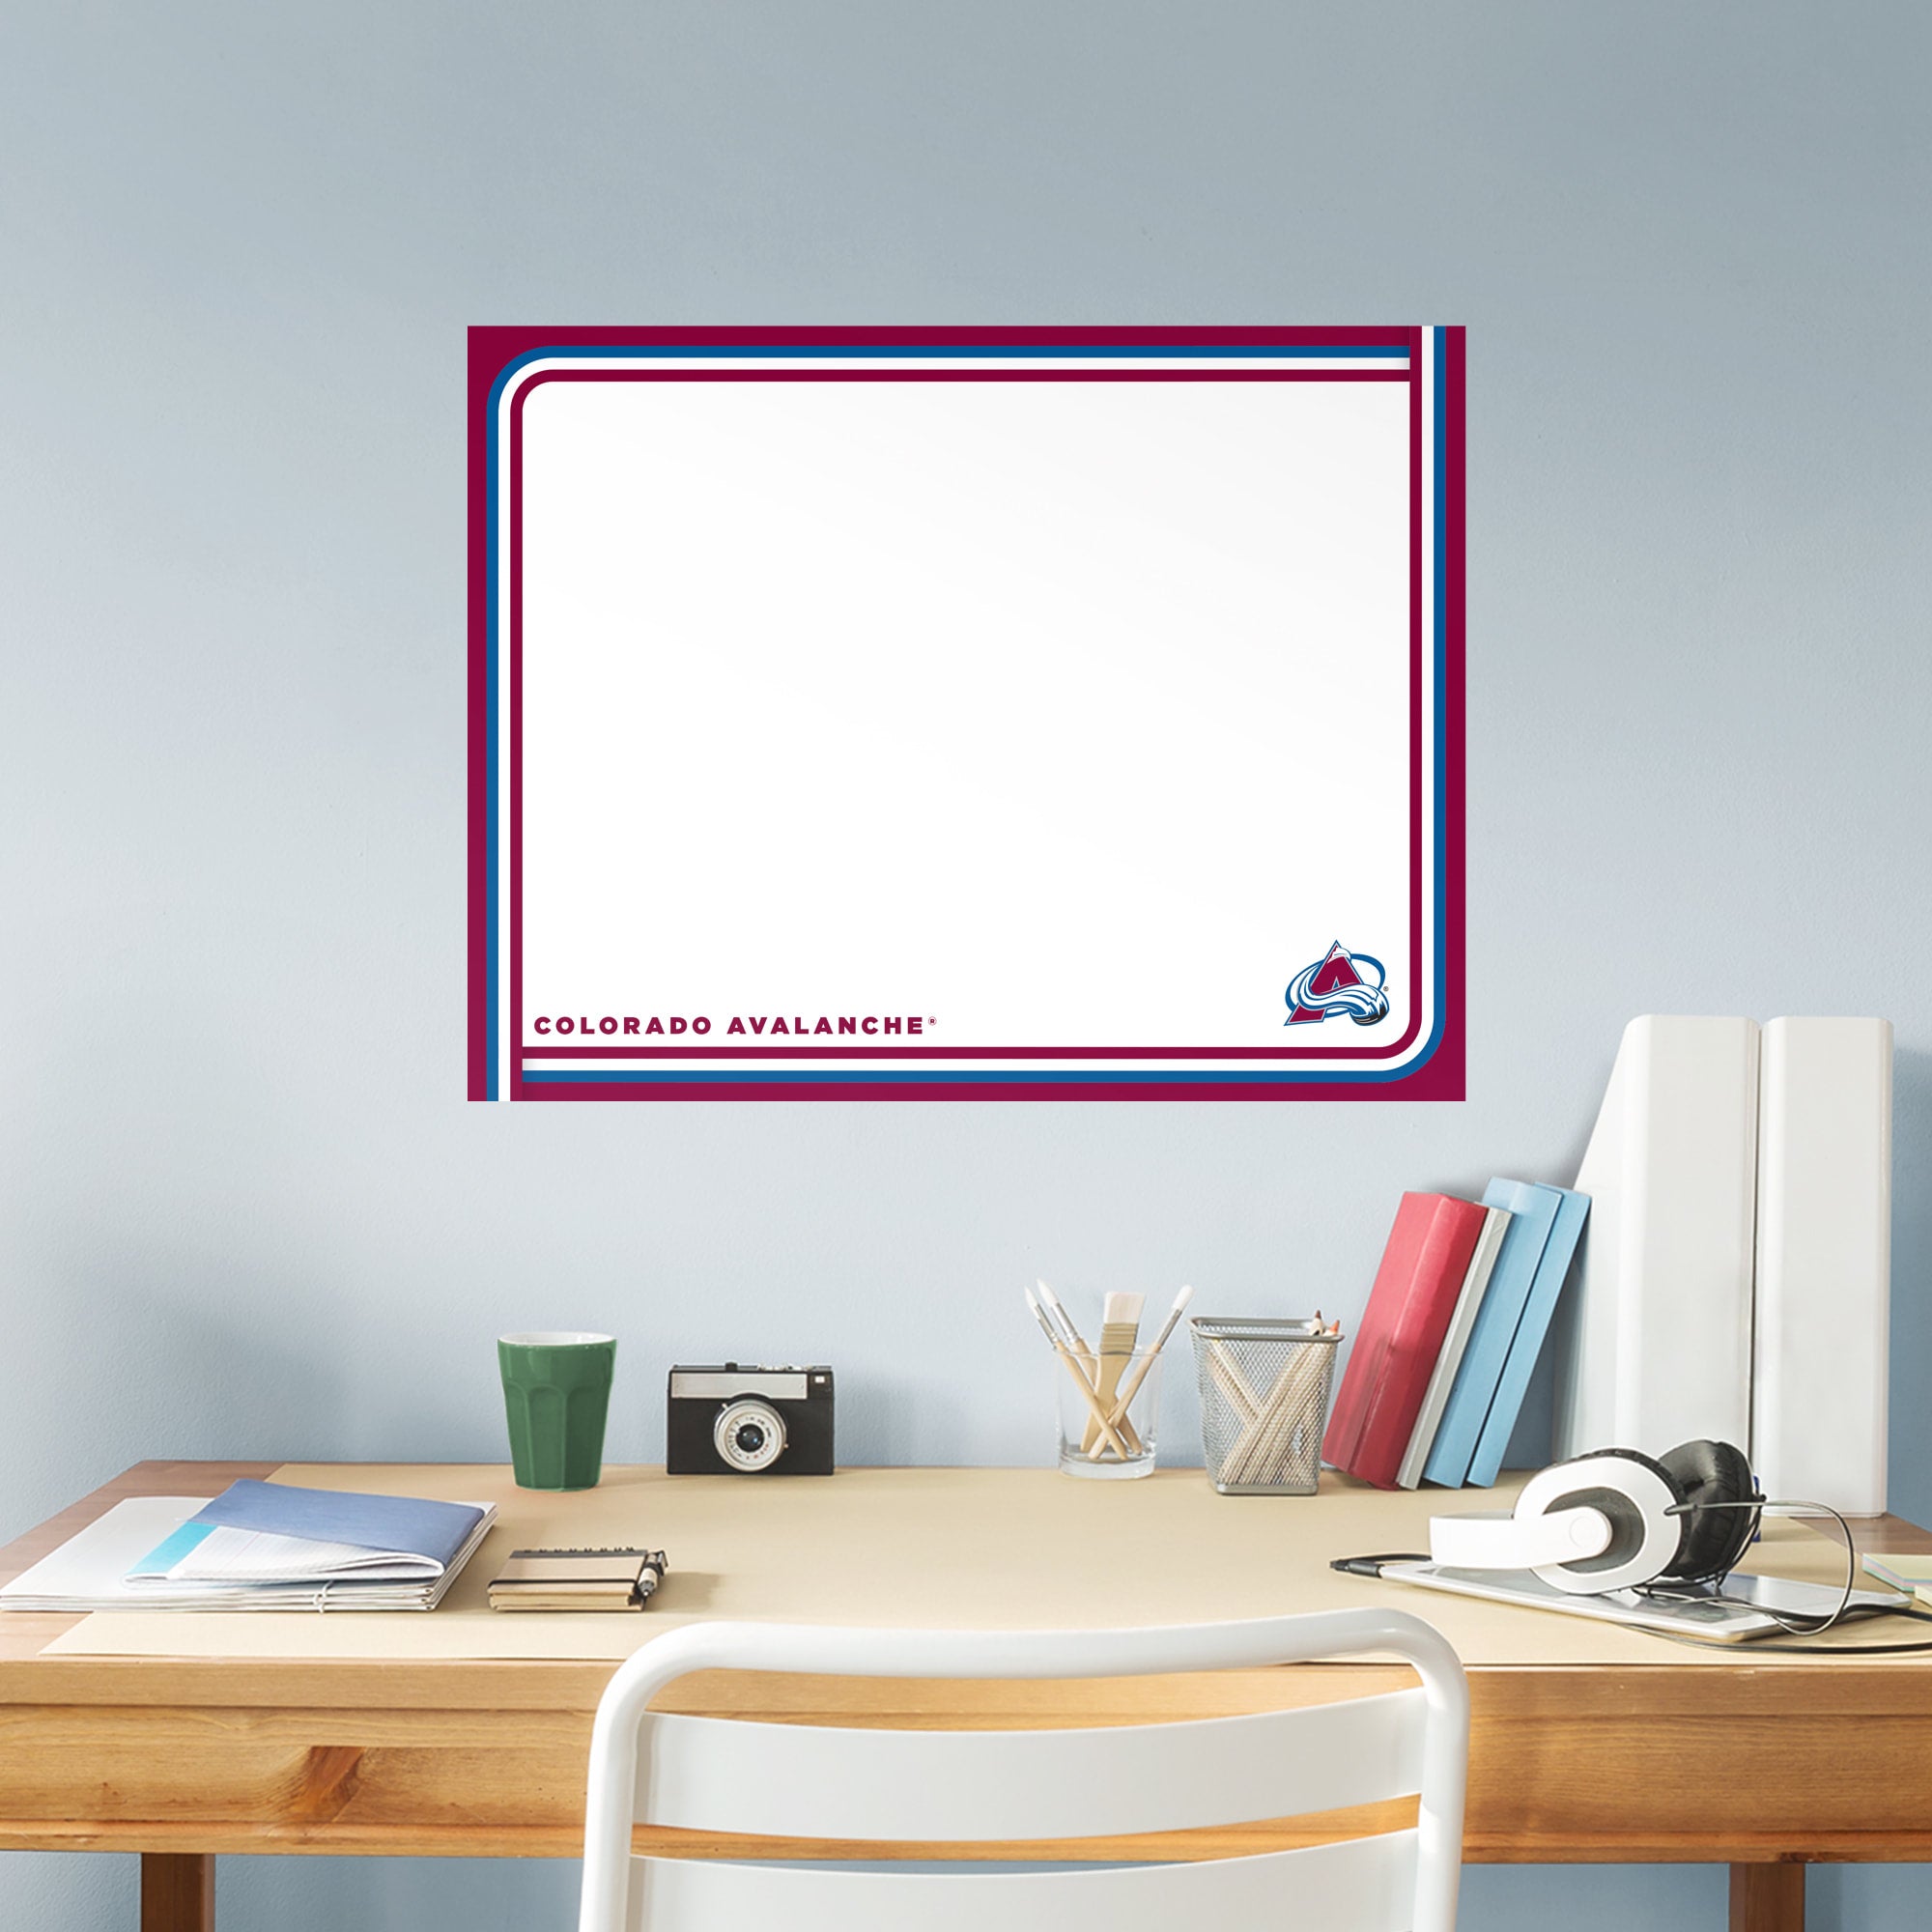 Colorado Avalanche: Dry Erase Whiteboard - X-Large Officially Licensed NHL Removable Wall Decal XL by Fathead | Vinyl